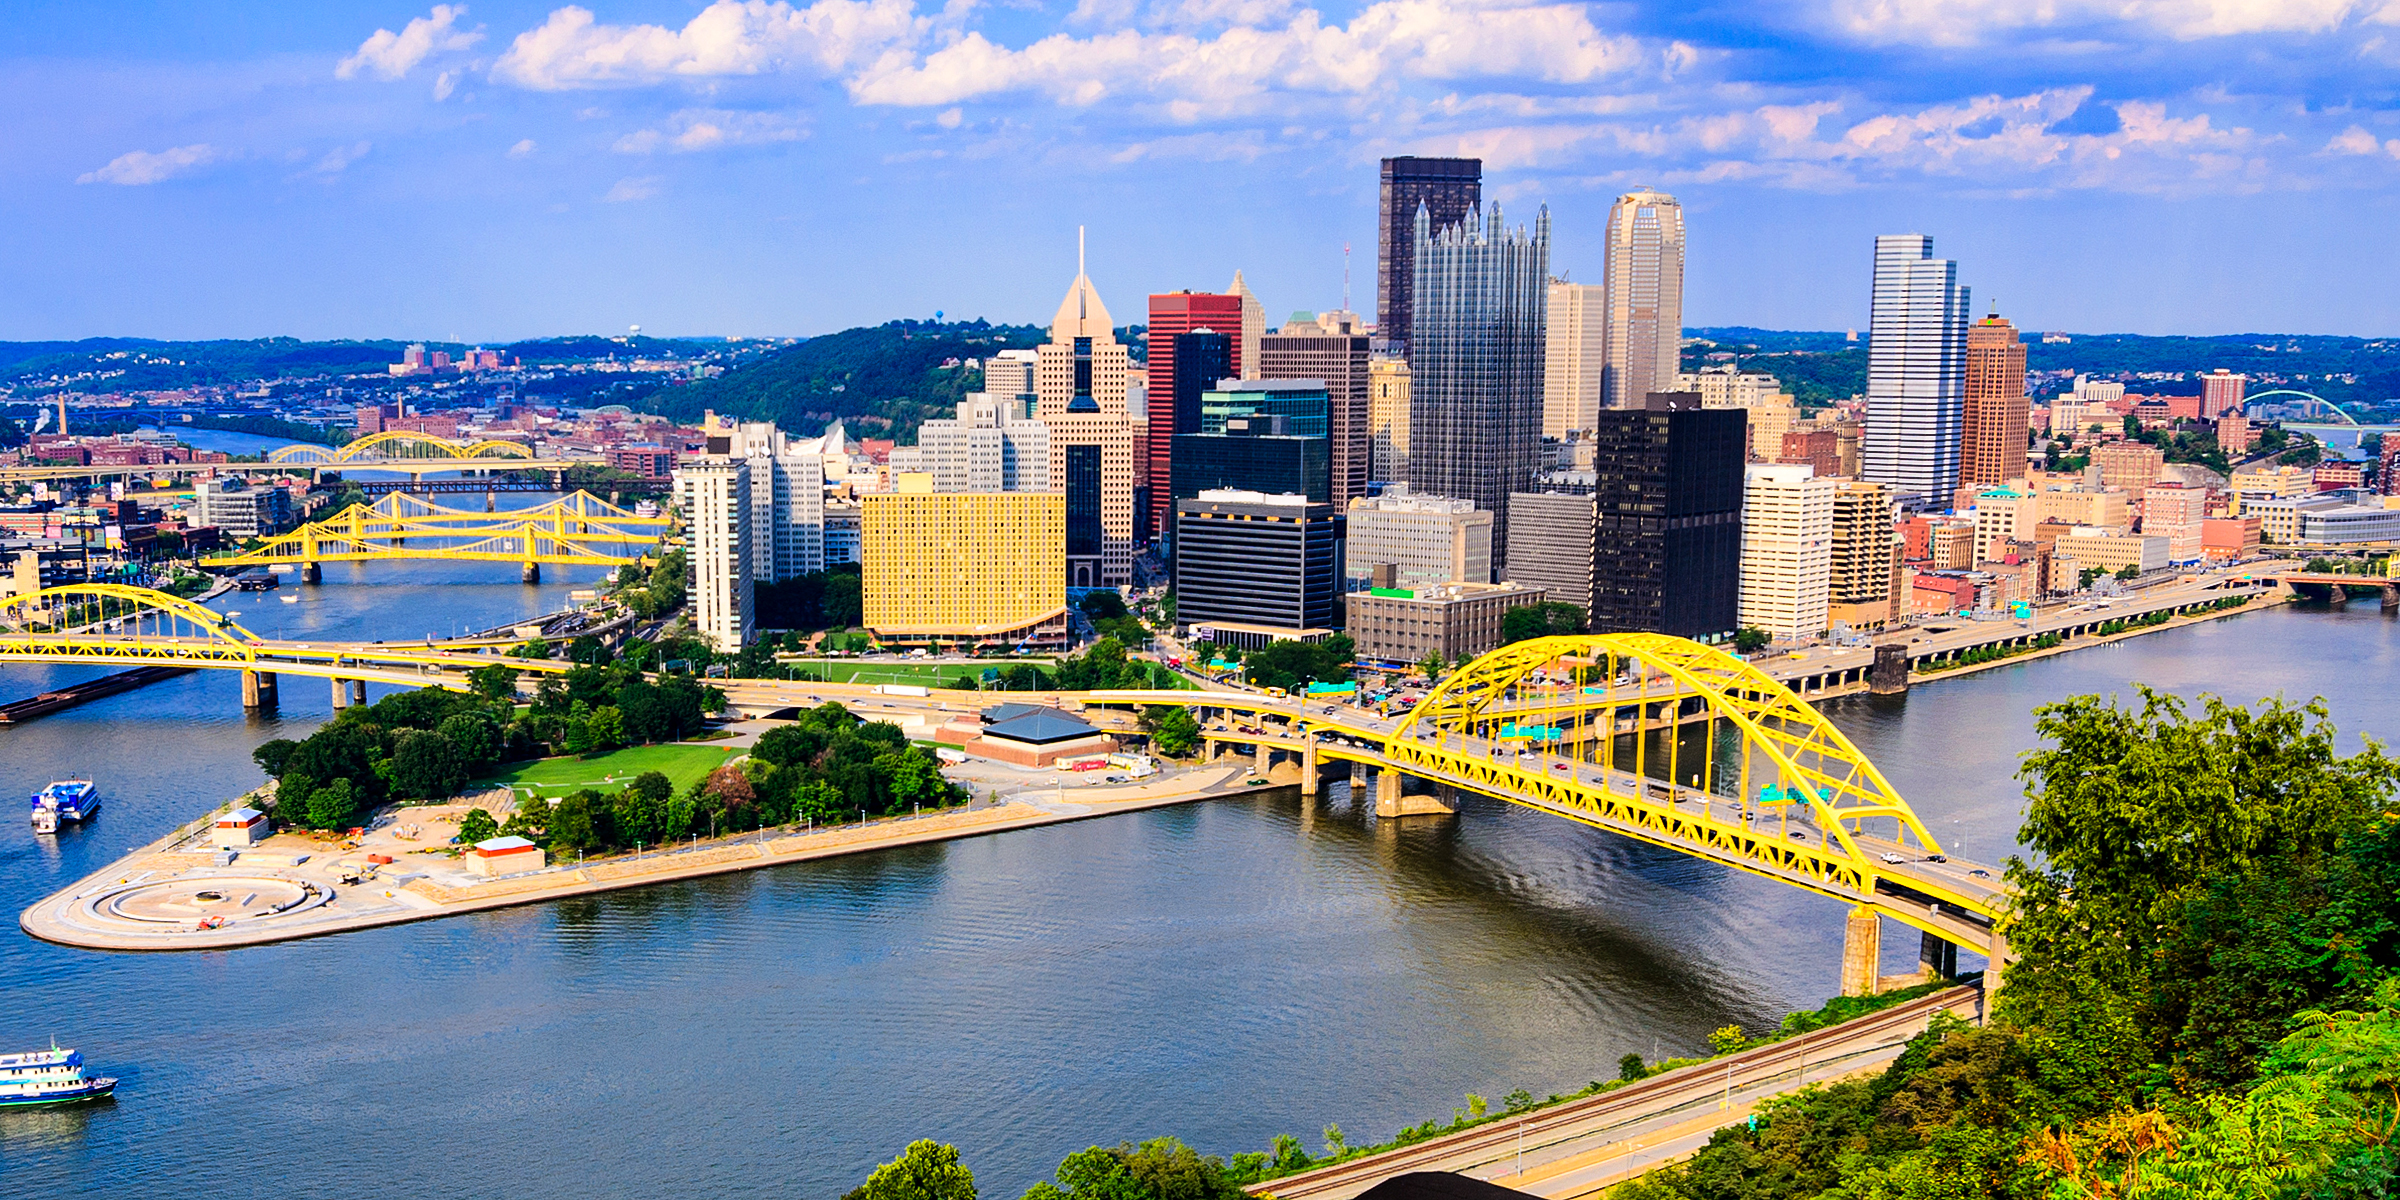 Aerial view of Pennsylvania | Source: Shutterstock